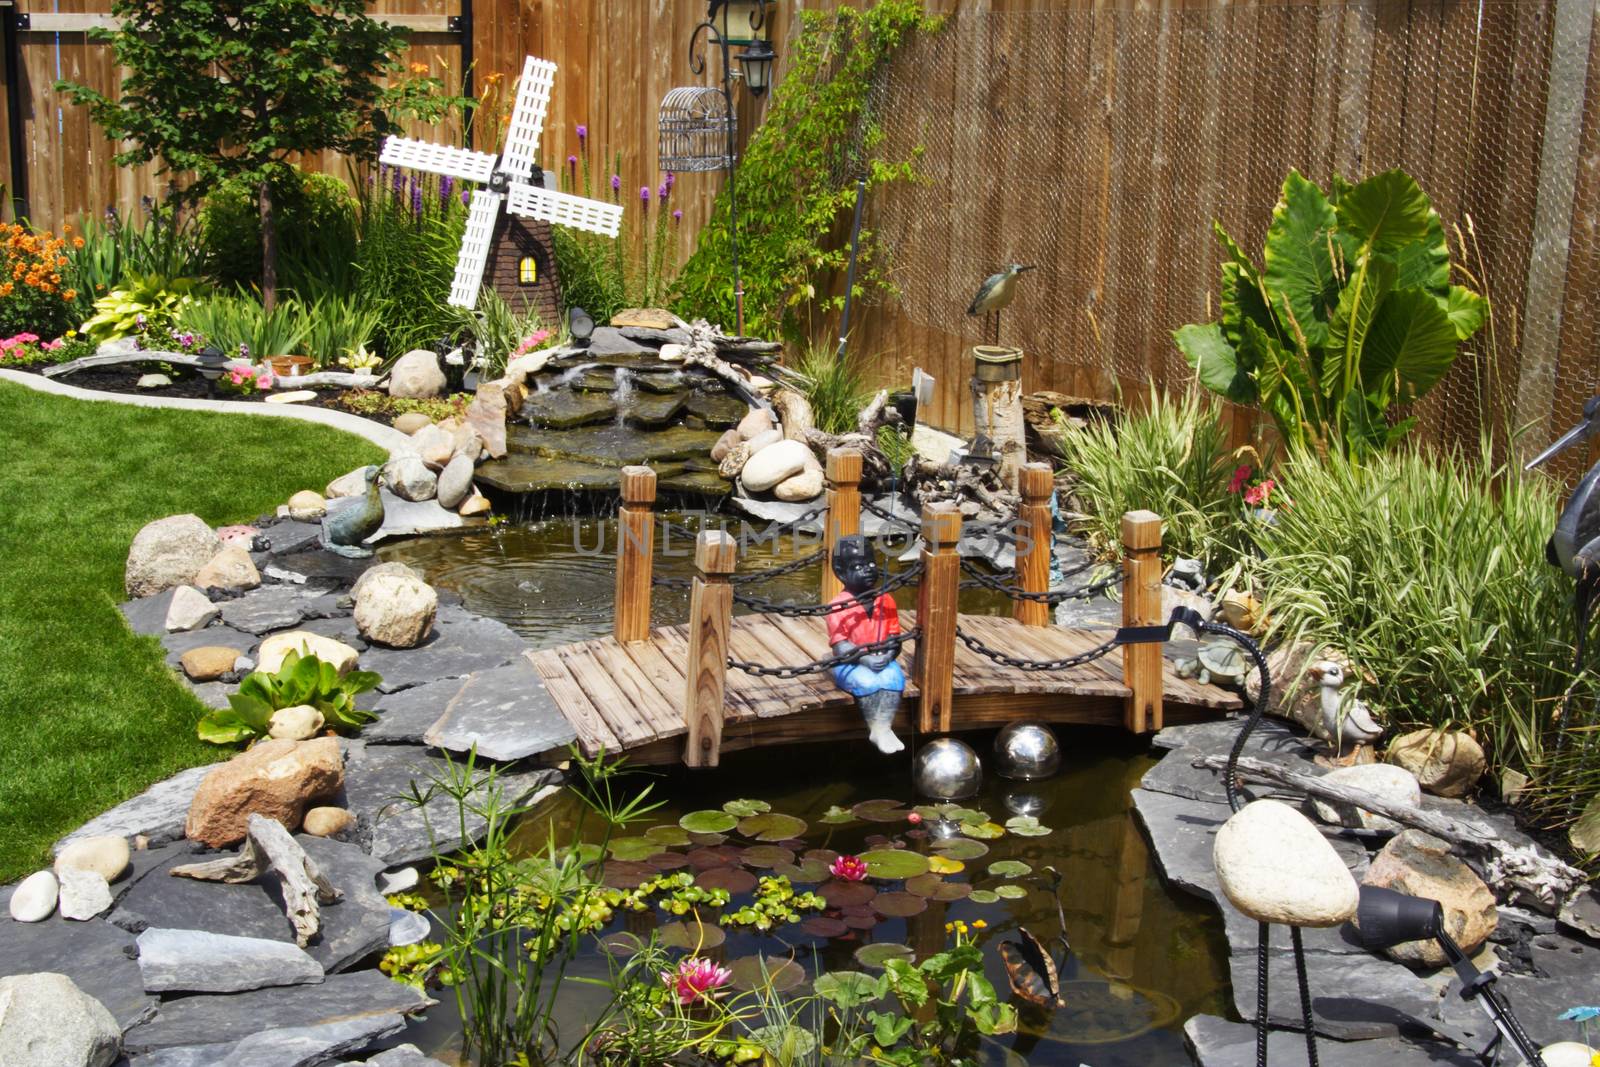 A beautifully designed water garden feature tied into a lovely perennial border makes this backyard a wonderful place to relax and entertain in the summer.